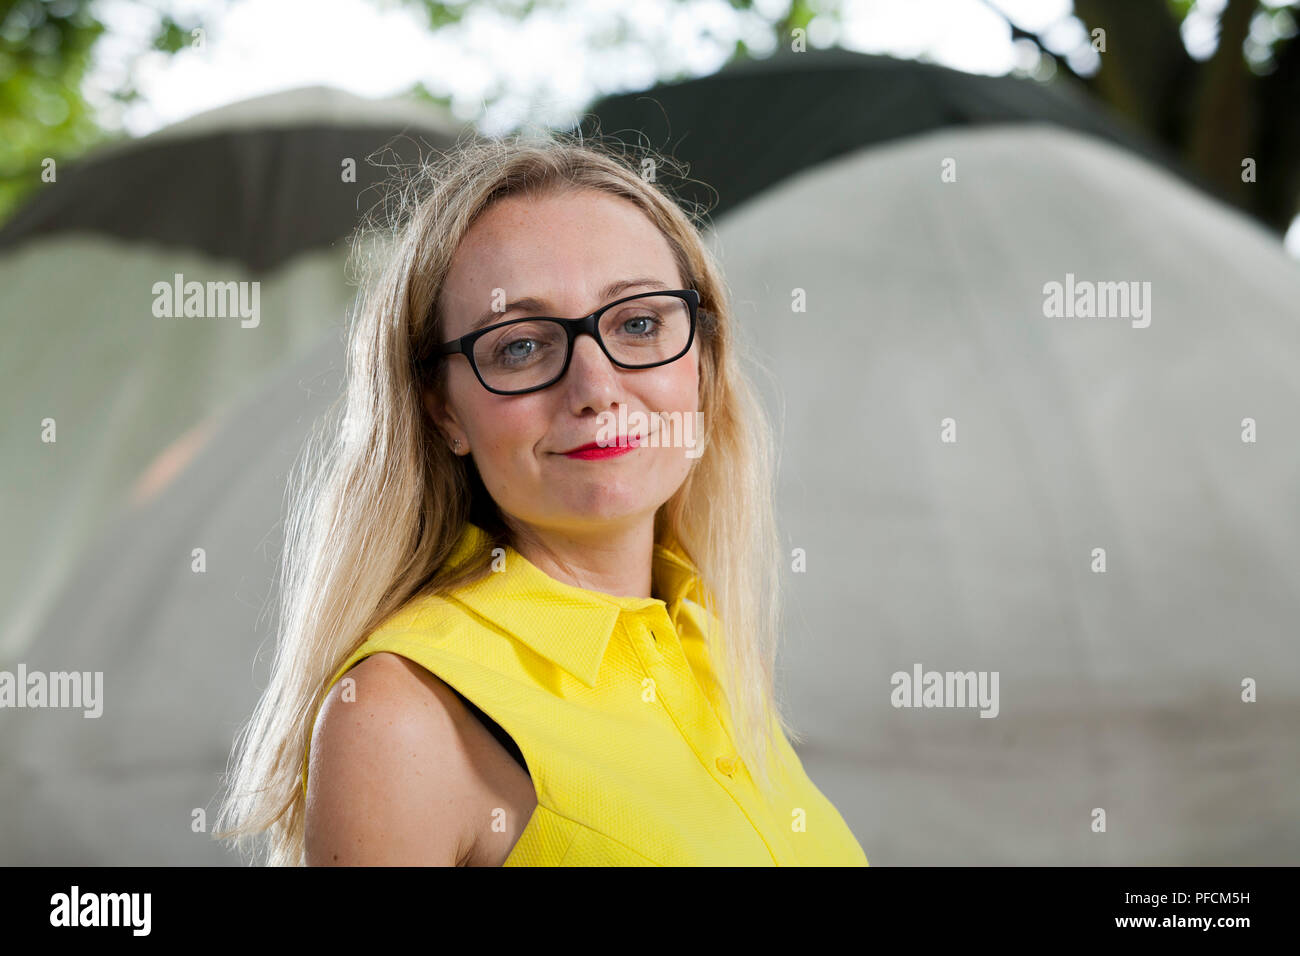 Edinburgh, UK. 21st August, 2018. Claire 'Cerrie' Burnell is an English actress, singer, playwright, children's author, and former television presenter for the BBC children's channel CBeebies. Pictured at the Edinburgh International Book Festival. Edinburgh, Scotland.  Picture by Gary Doak / Alamy Live News Stock Photo